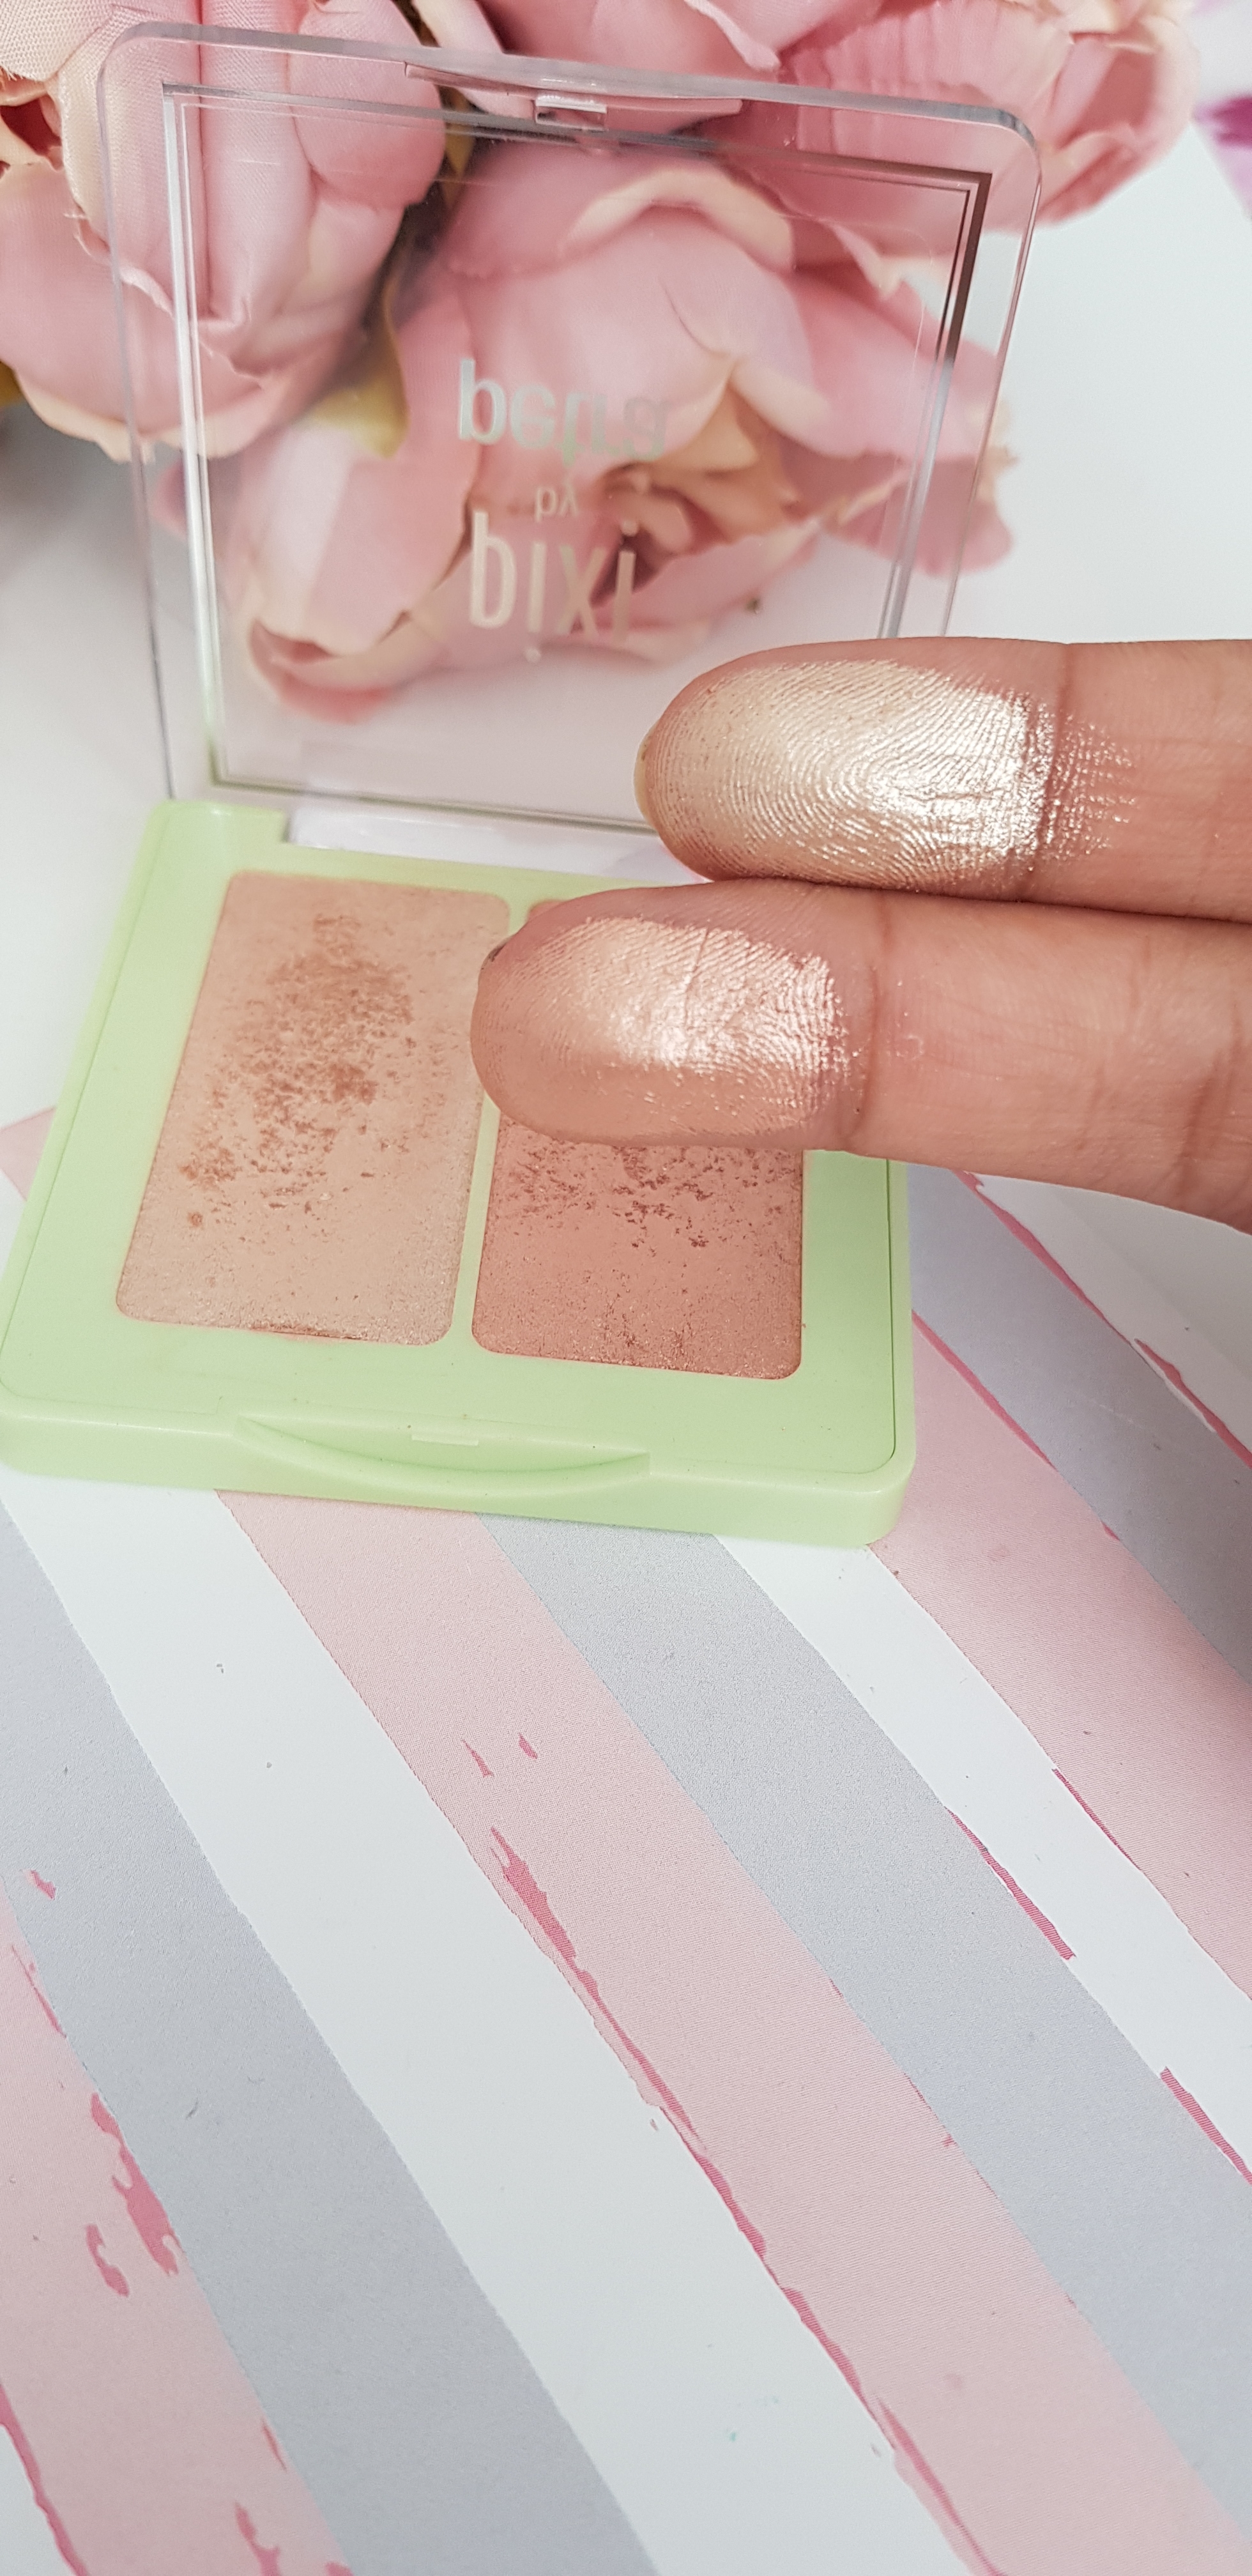 Pixi Beauty Glow in a Box - Glow-y Gossamer Duo highlighters - Ms Tantrum Blog